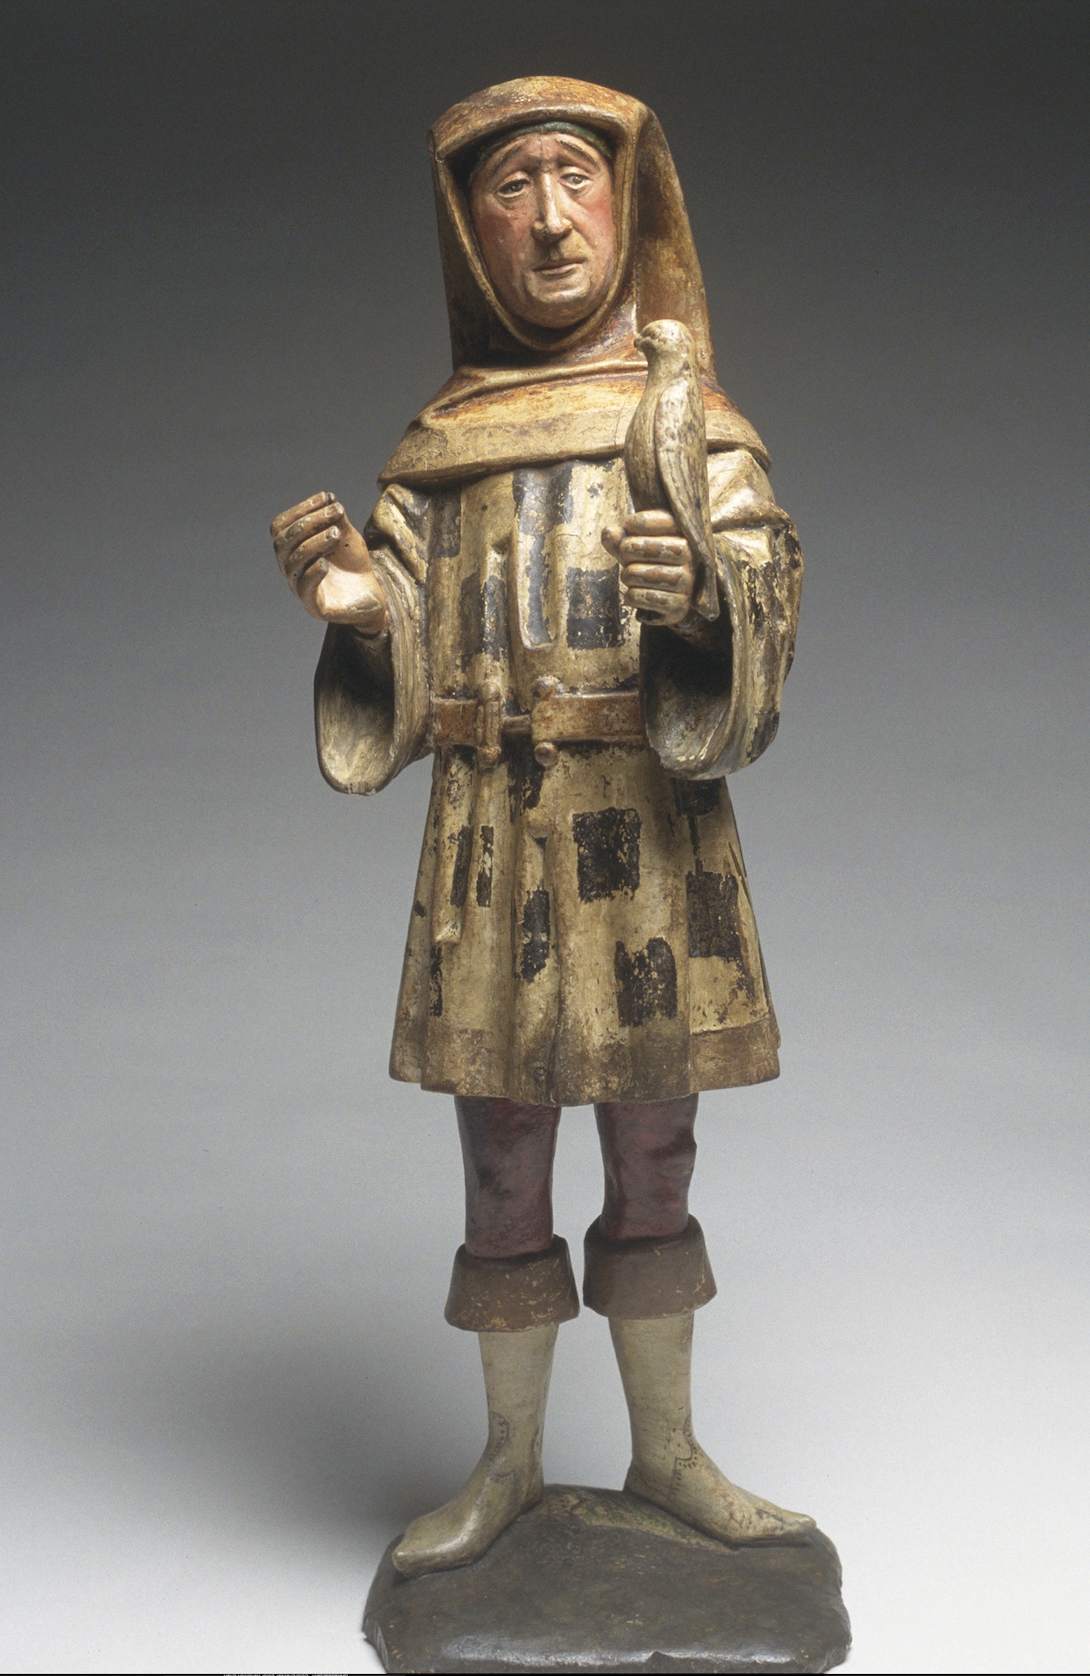 Painted wood sculpture of the Falconer, featuring a standing man in historic dress holding a falcon in his left hand.